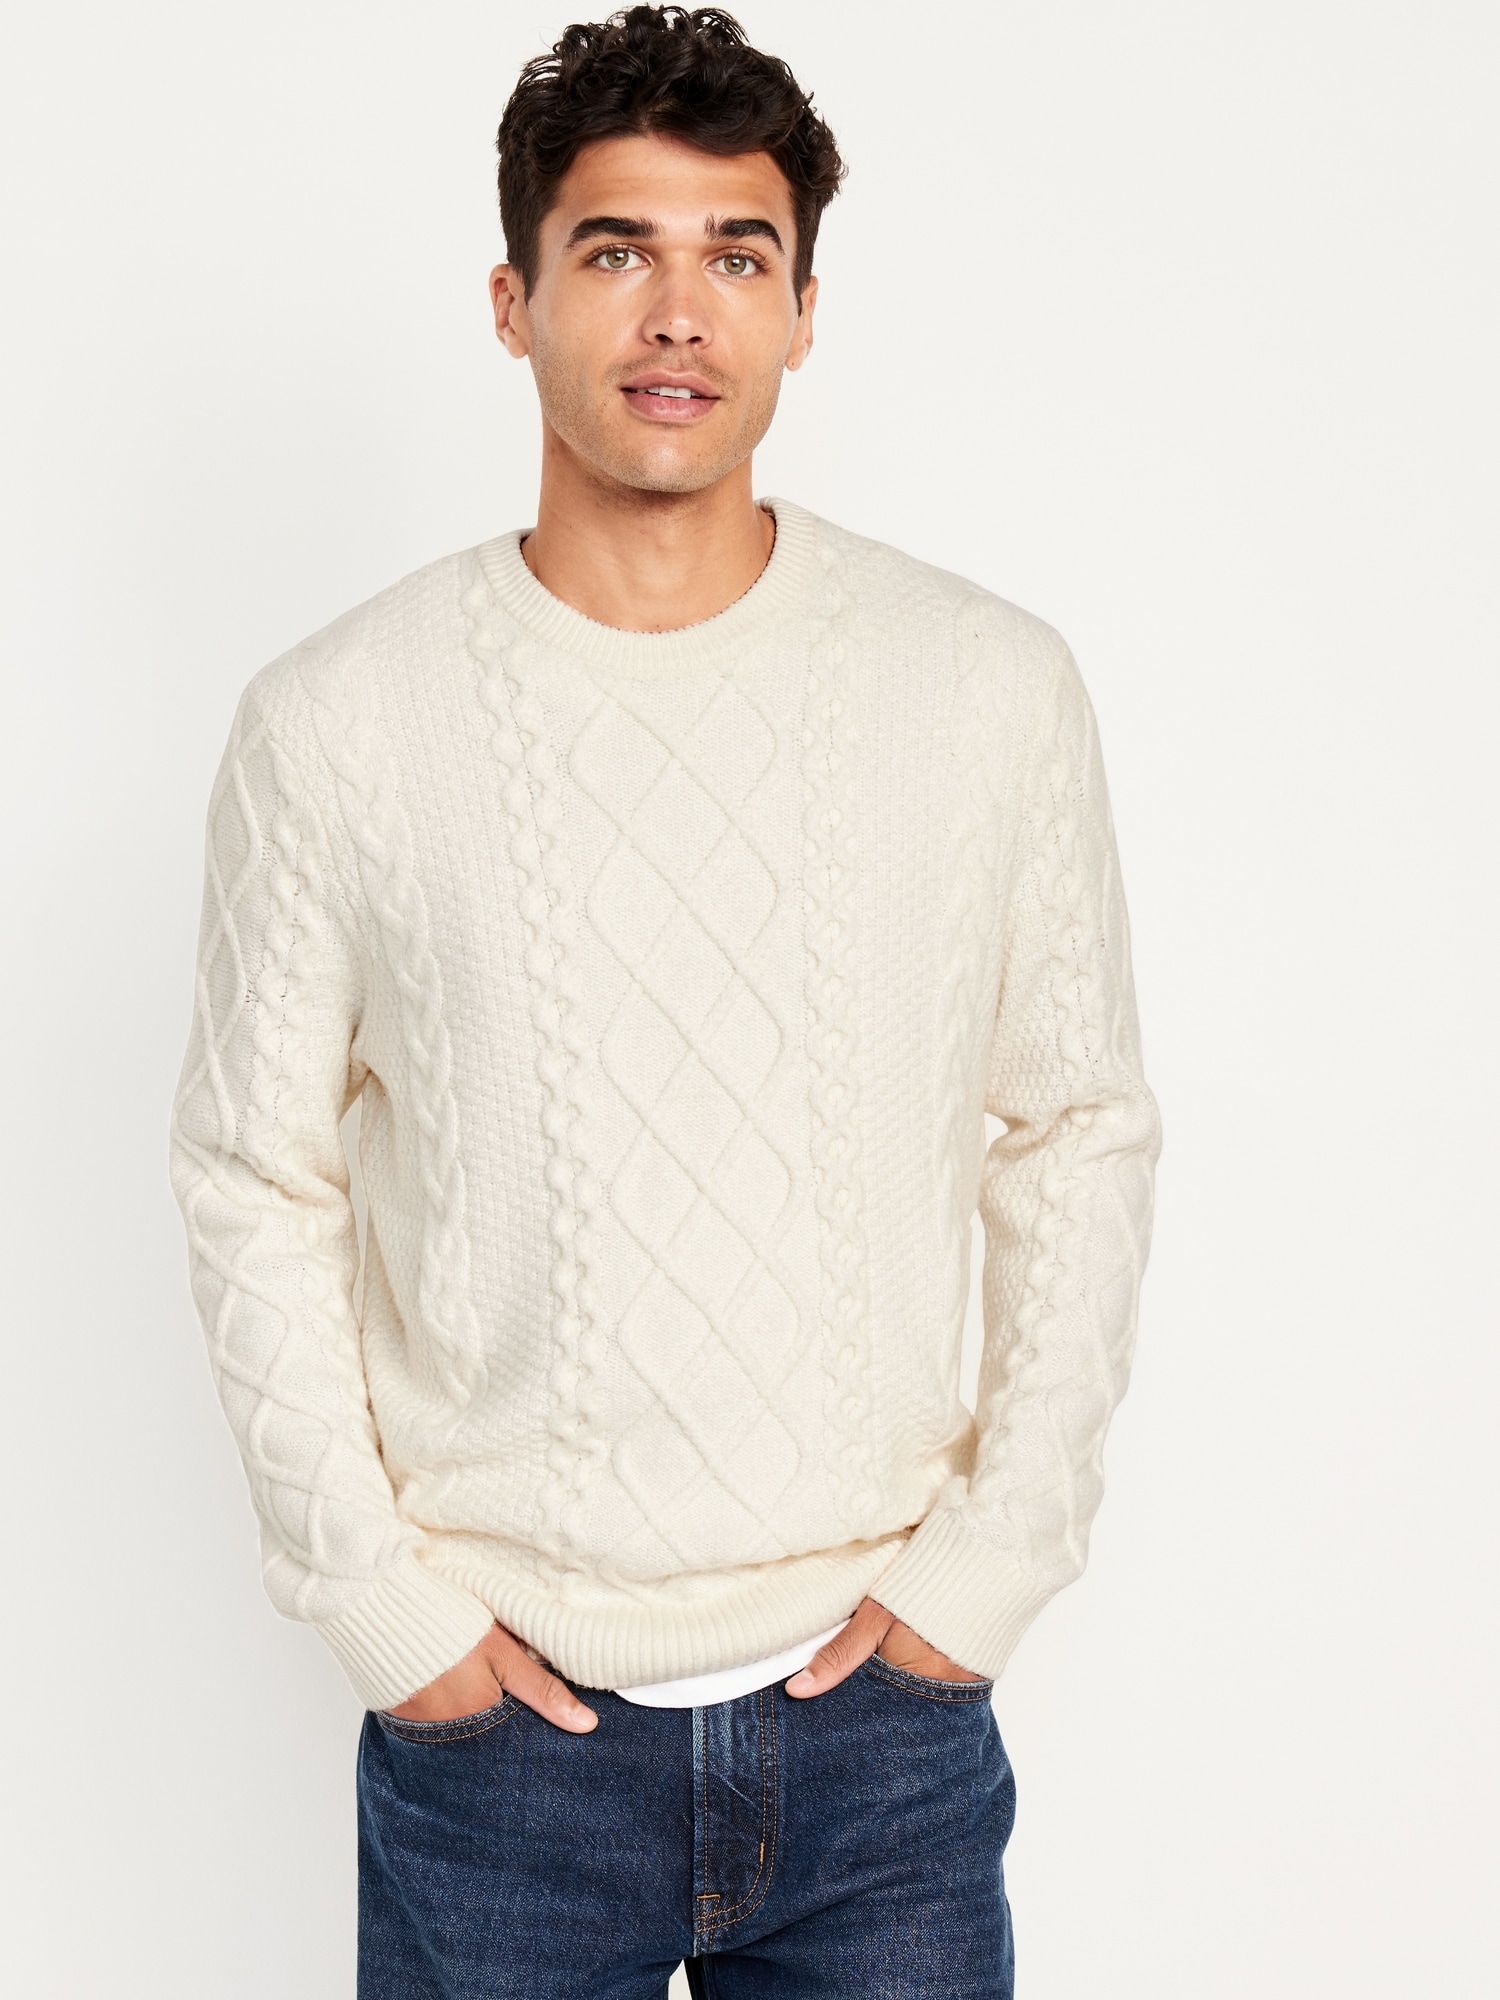 Offsite Synergy Crew Neck Sweater - Solid